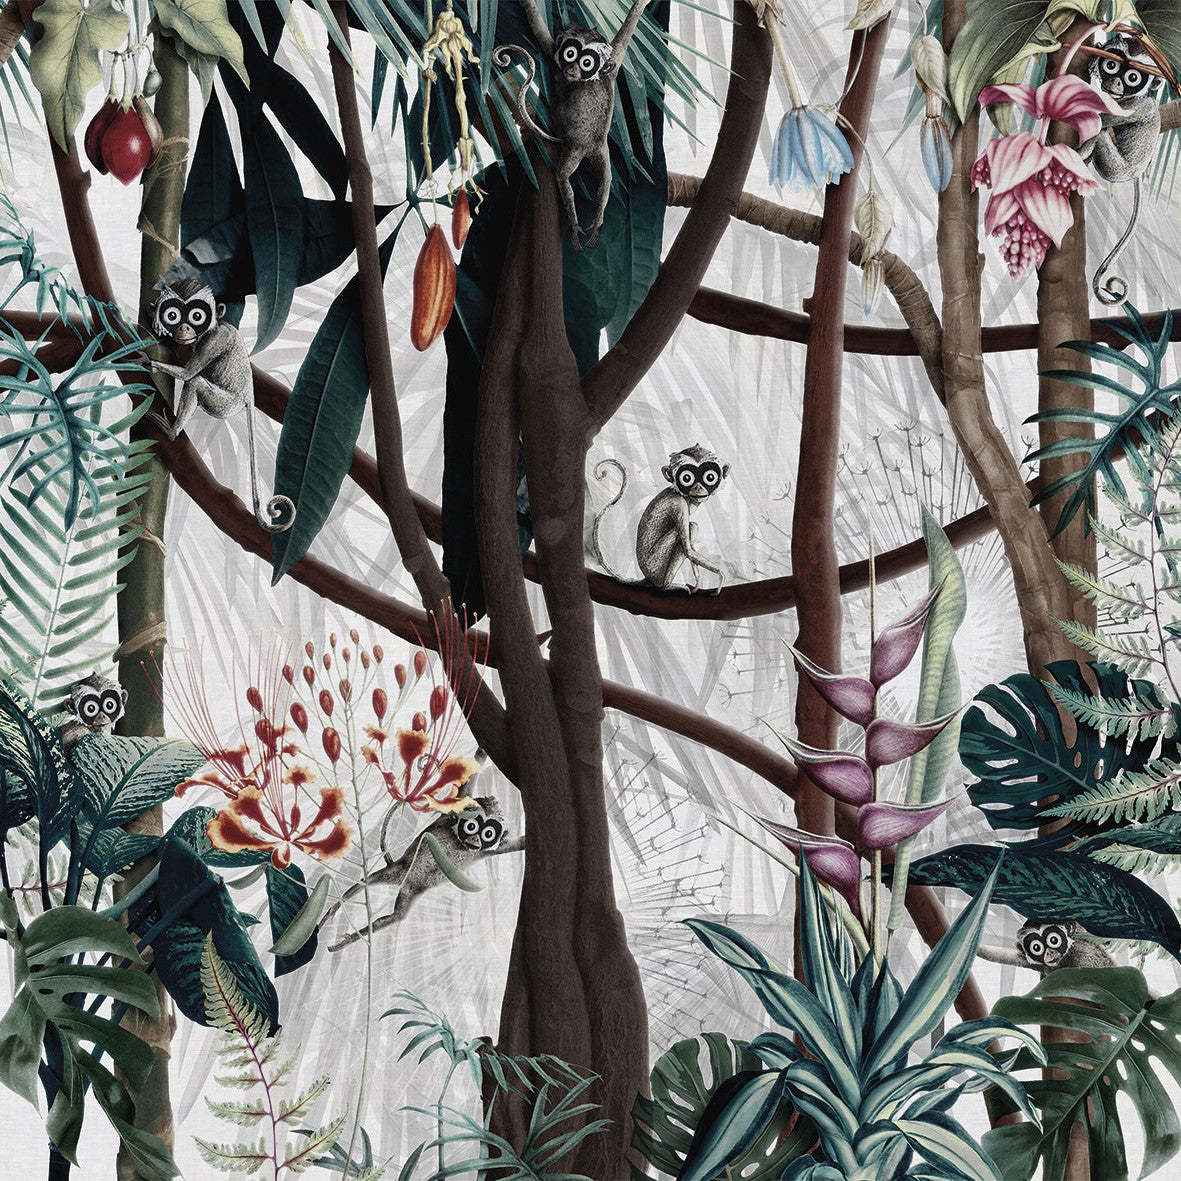 Londonart wallpapers inspired by Japan at Maison&Objet 2023